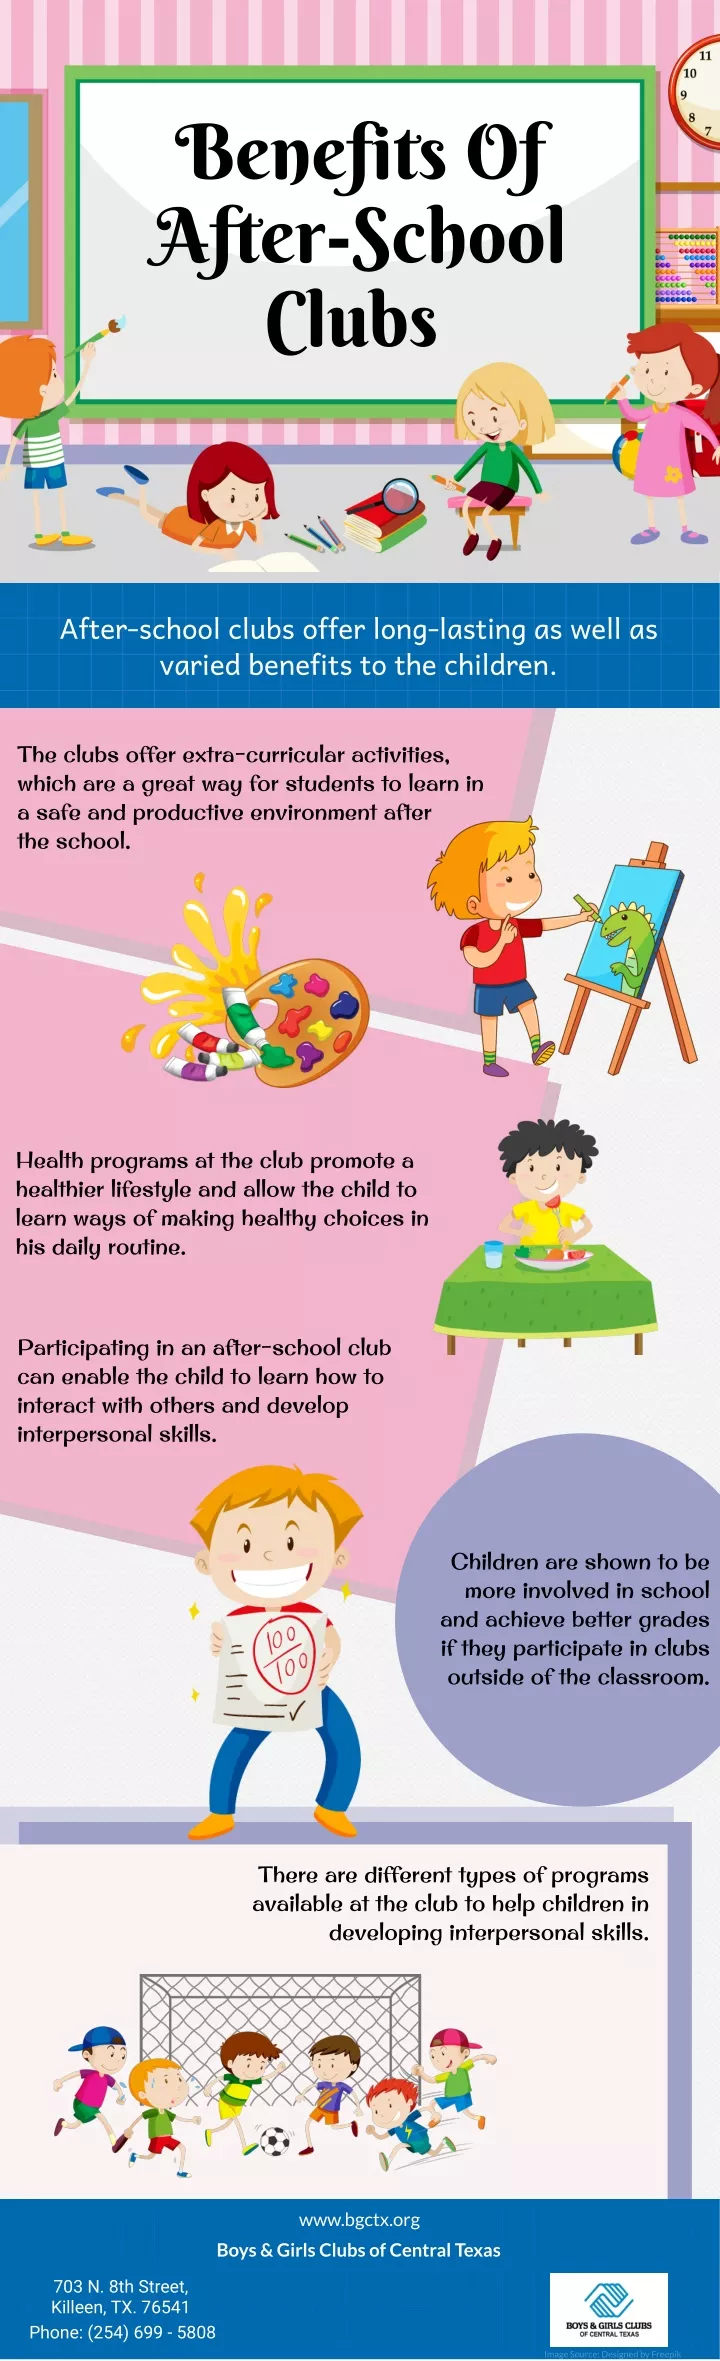 benefits of after school clubs